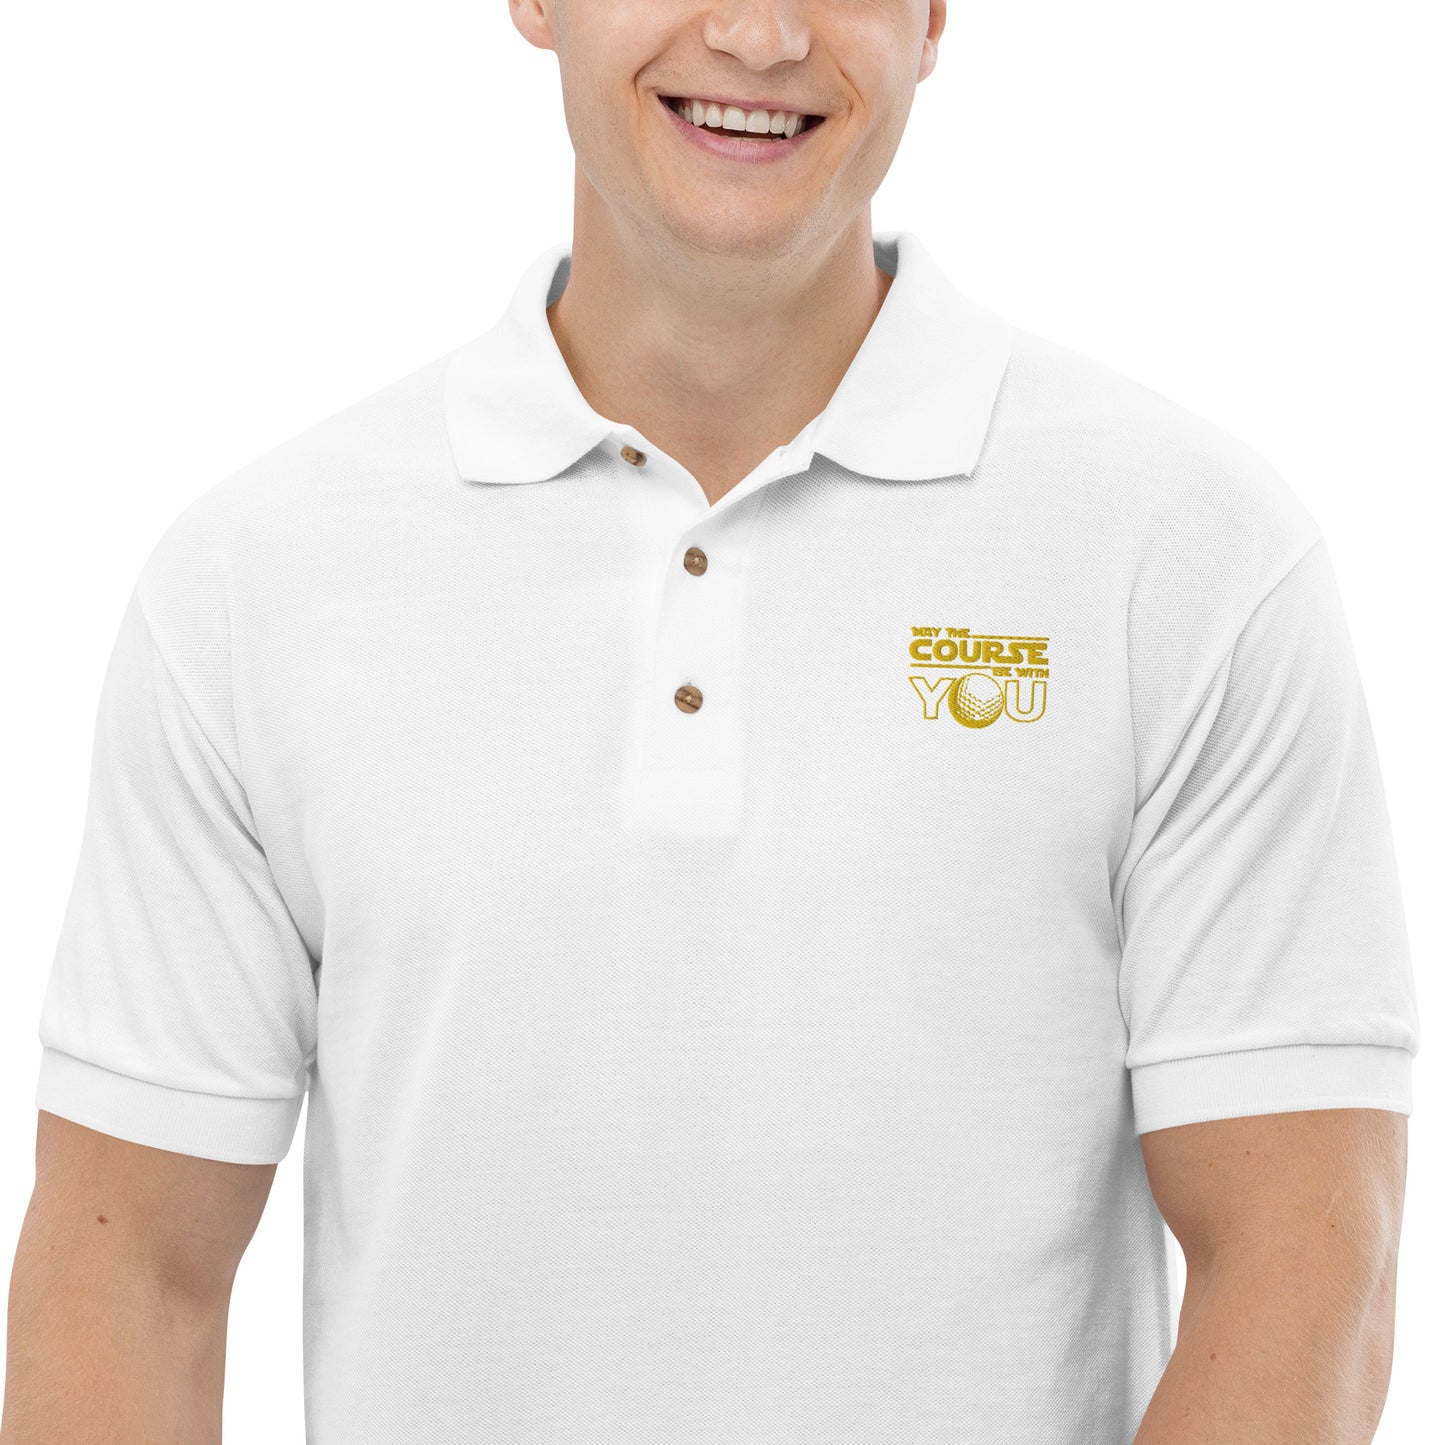 May The Course Be With You Polo Shirt (Yellow Lettering)